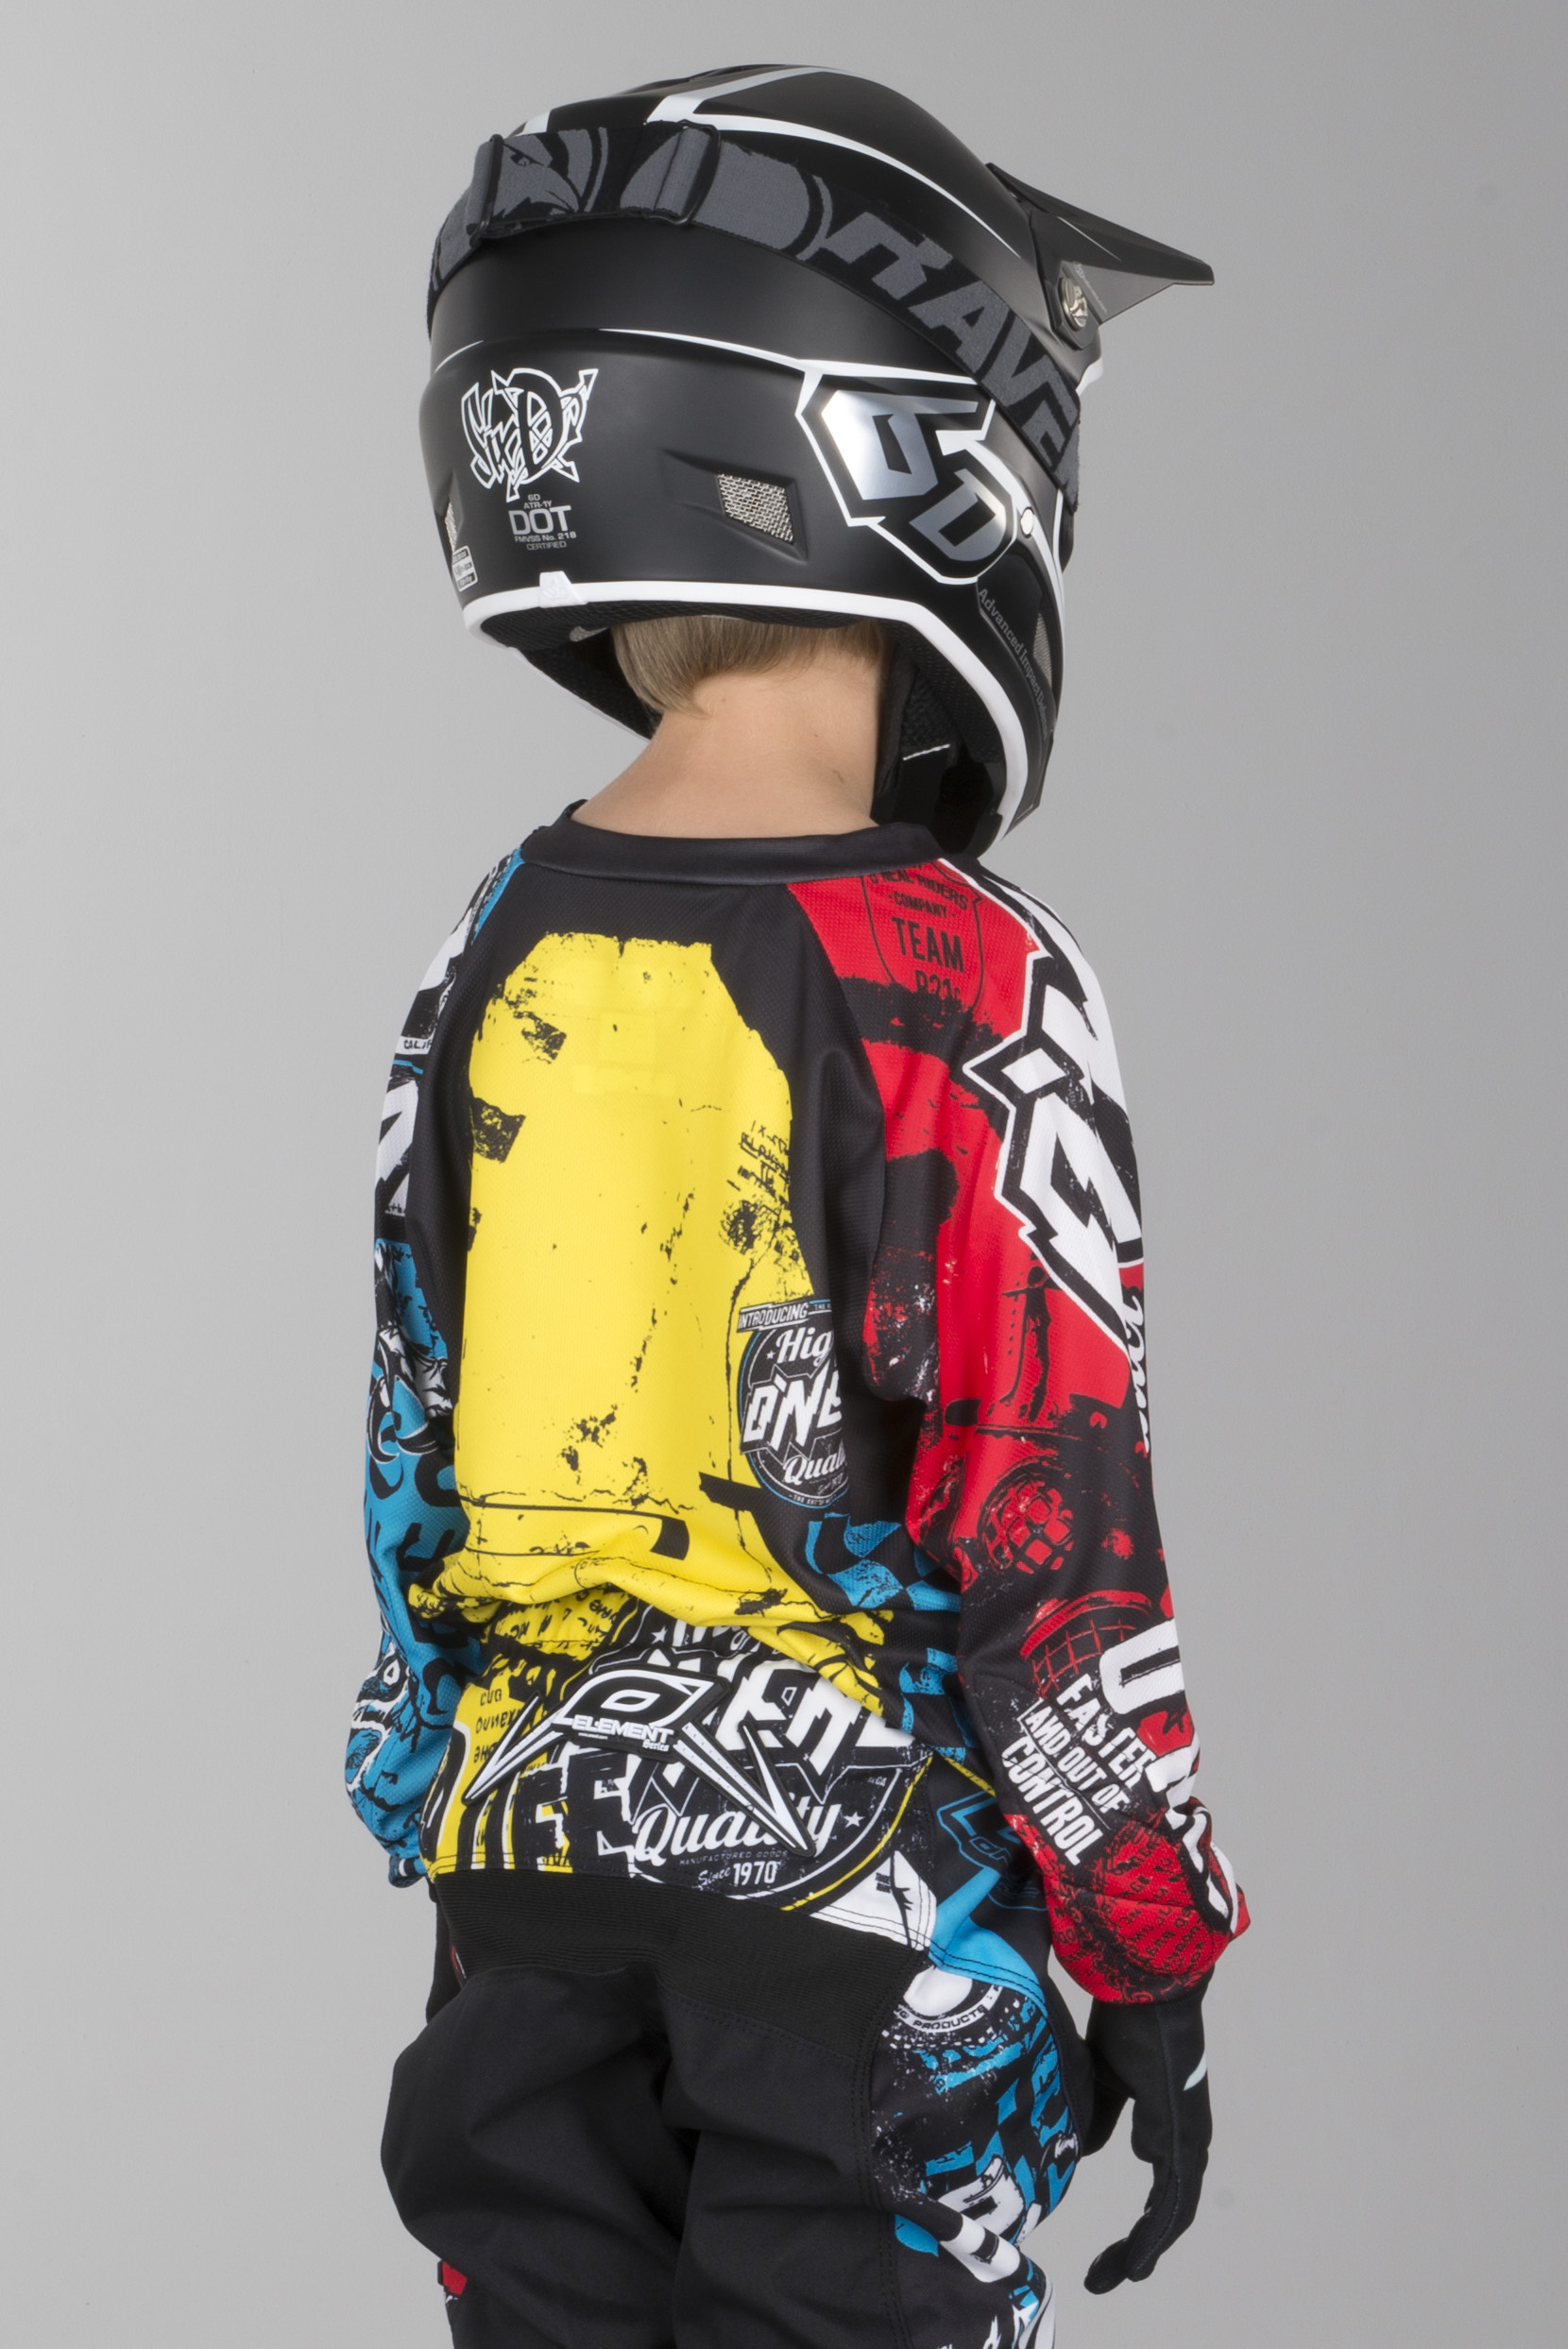 youth wild jersey